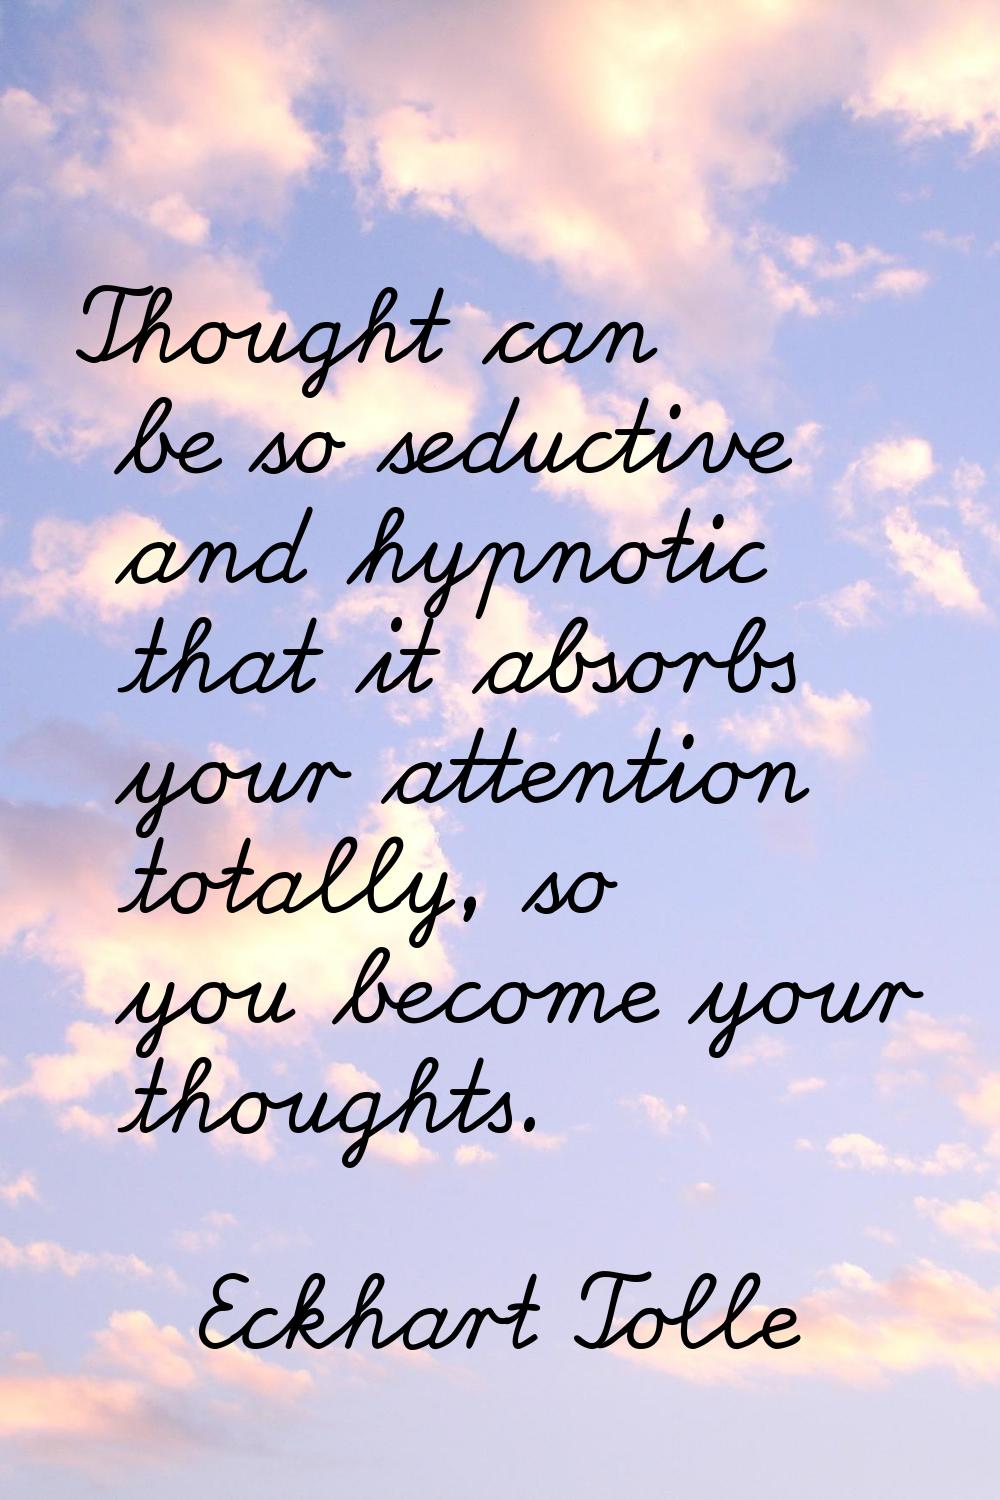 Thought can be so seductive and hypnotic that it absorbs your attention totally, so you become your